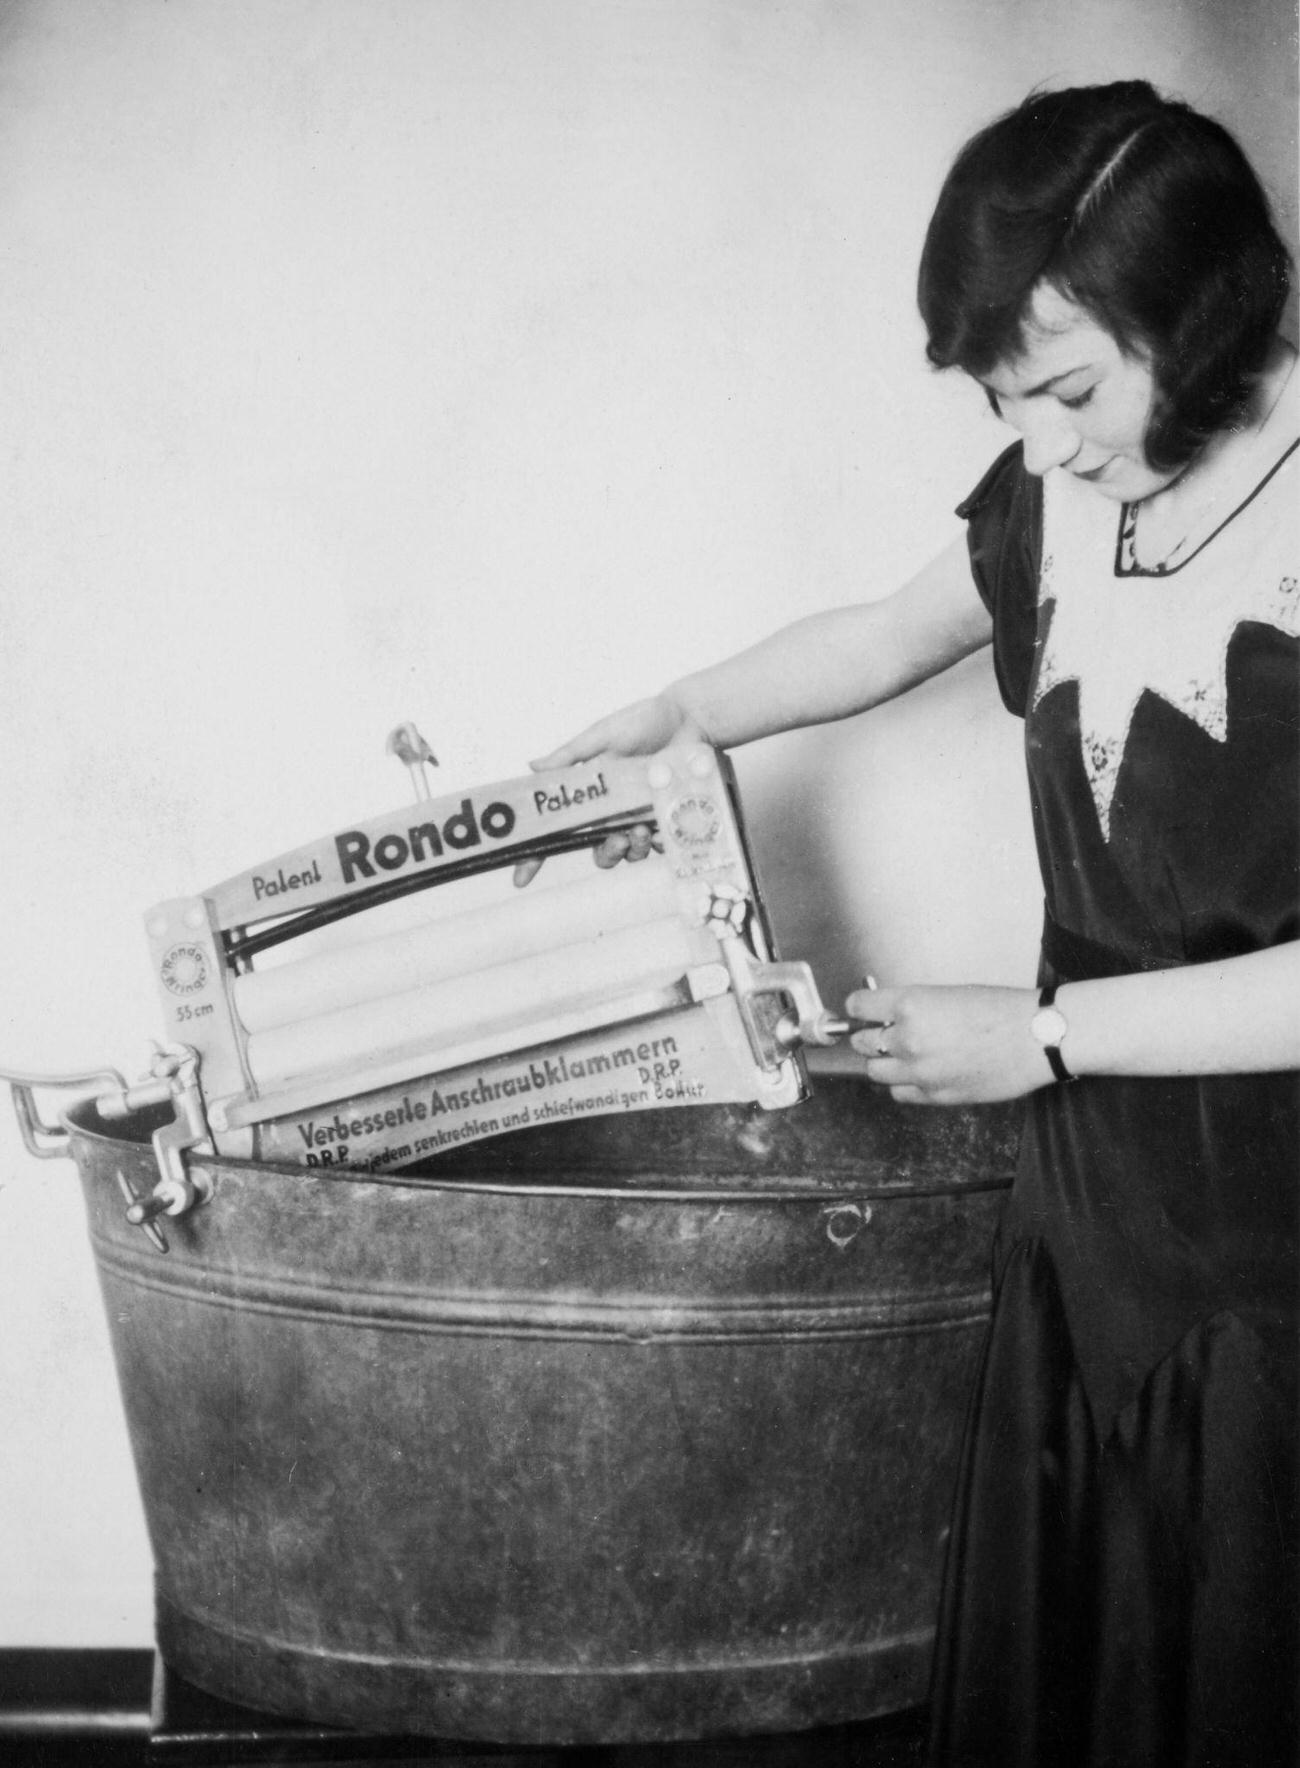 German woman installing a wringer over a wash tub, 1919.